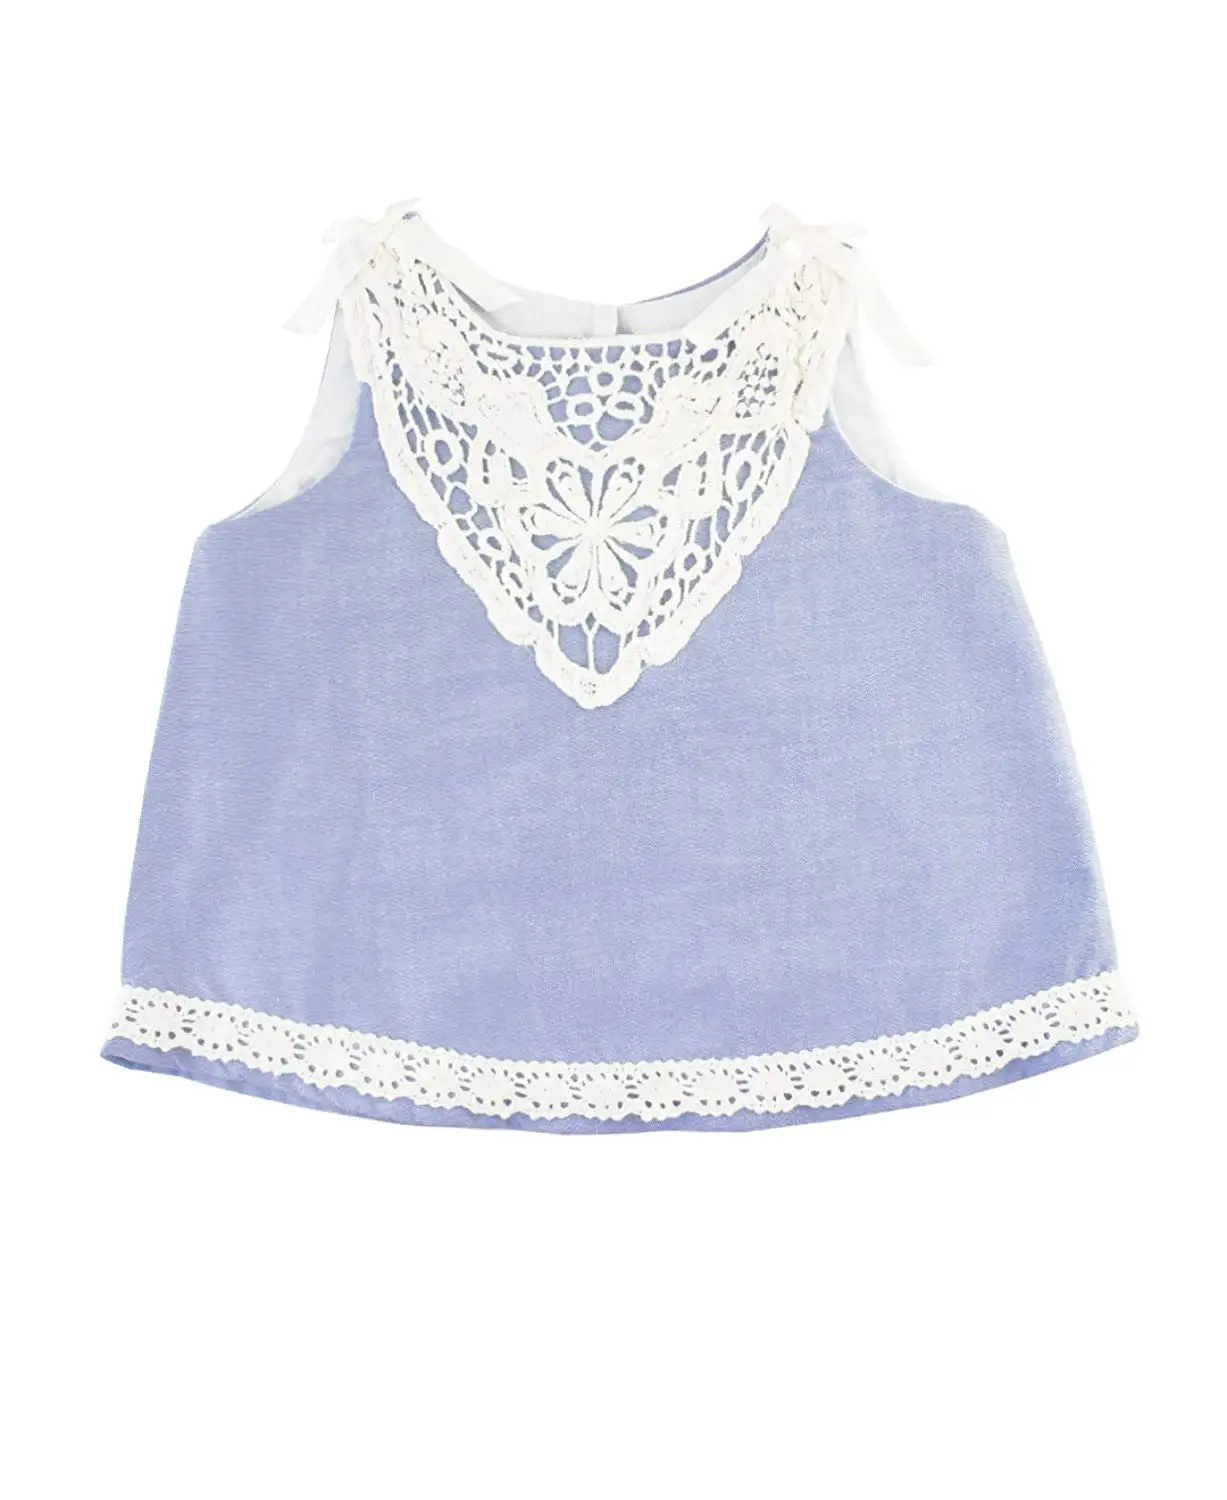 RuffleButts Baby//Toddler Girls Chambray Swing Top w//Crochet Lace Details